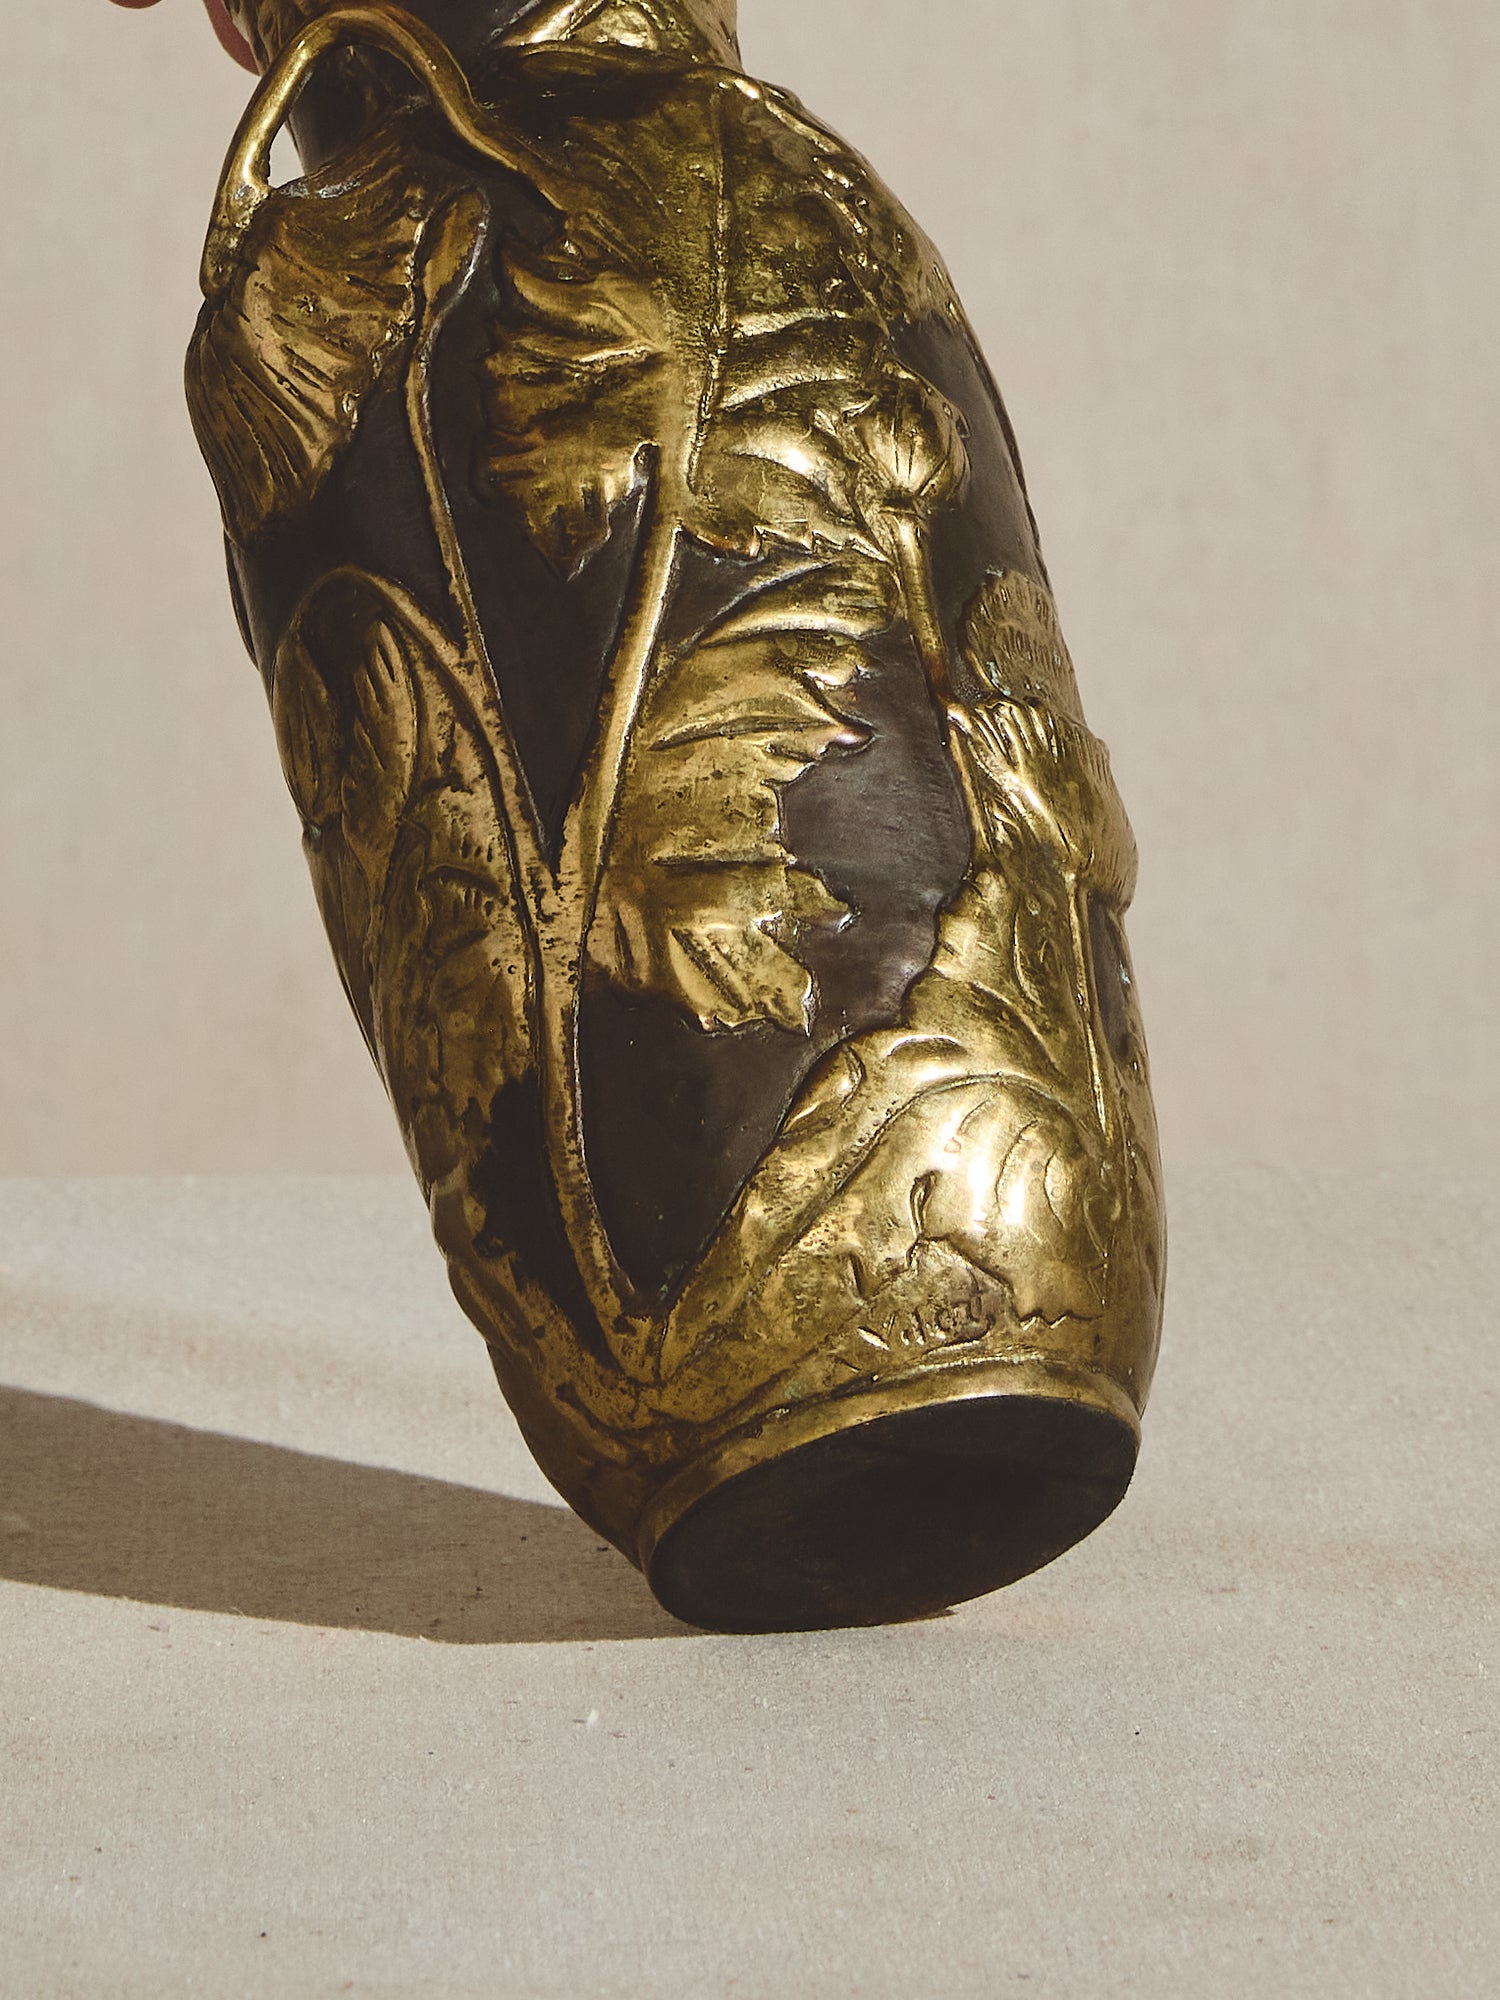 Ornate, solid bronze, art nouveau vase with tapered neck, decorative handles, and elongated body.